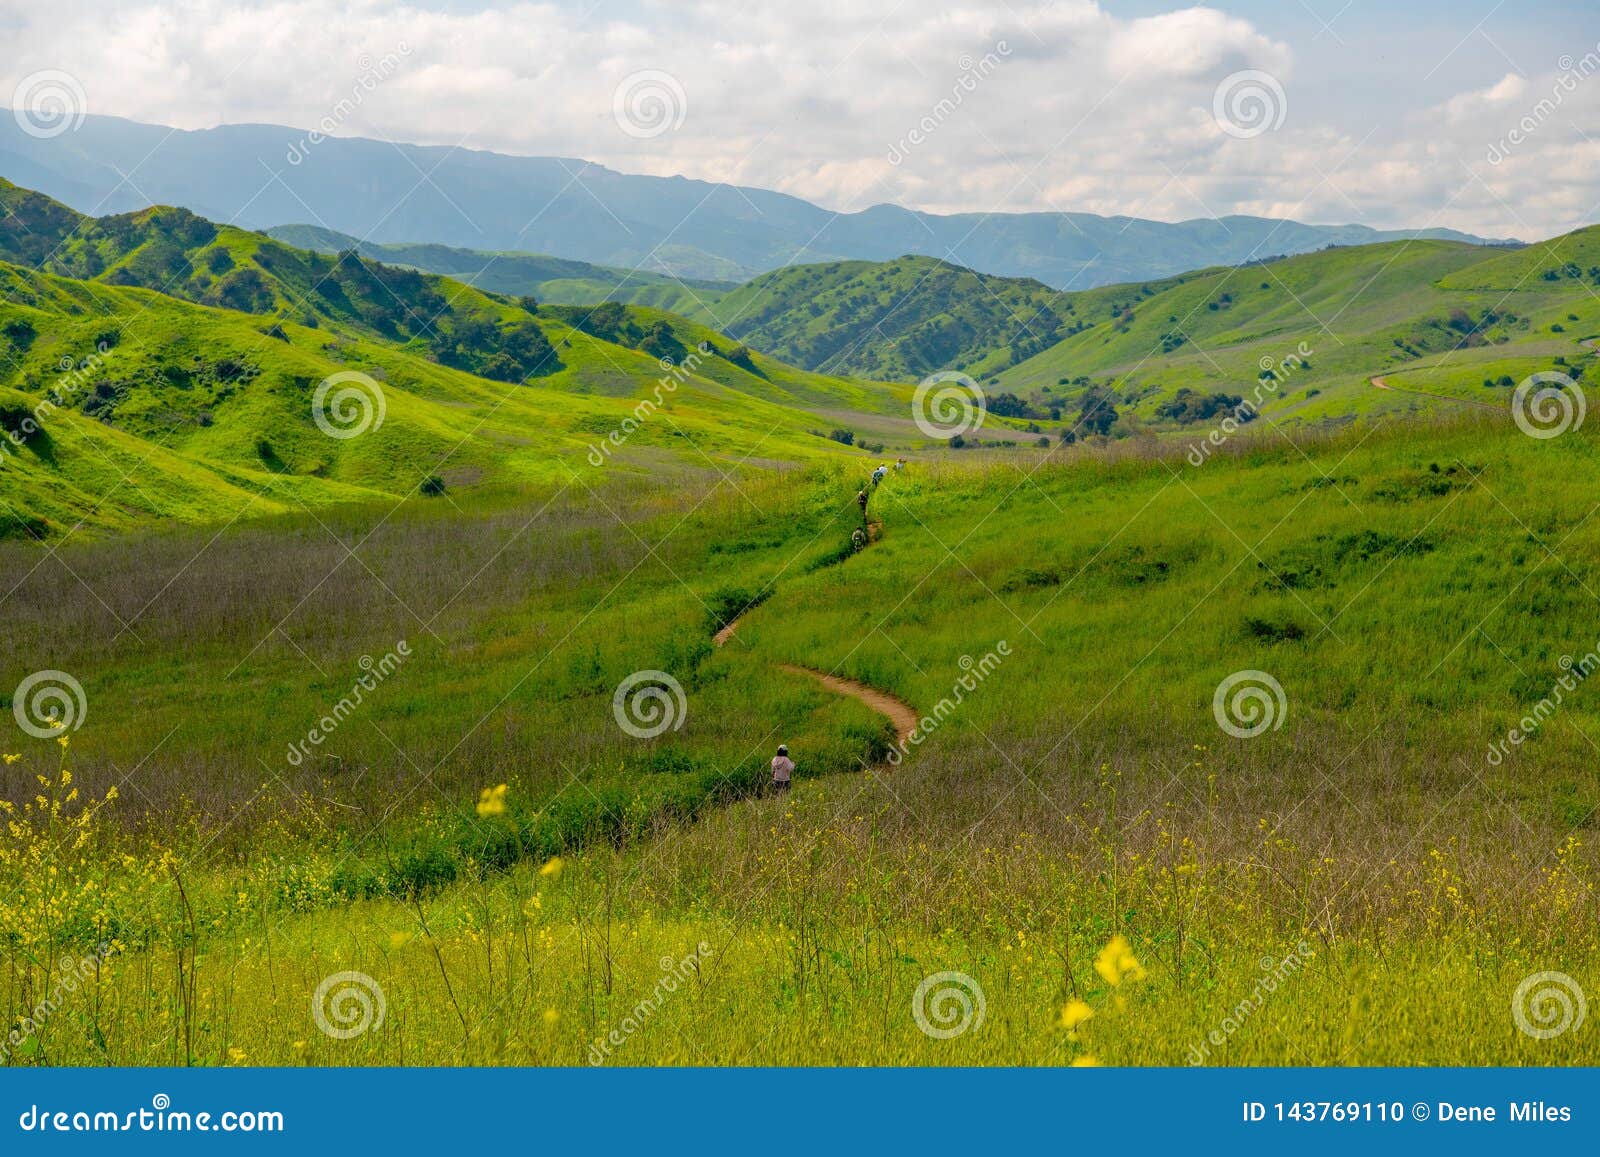 chino hills view in spring time